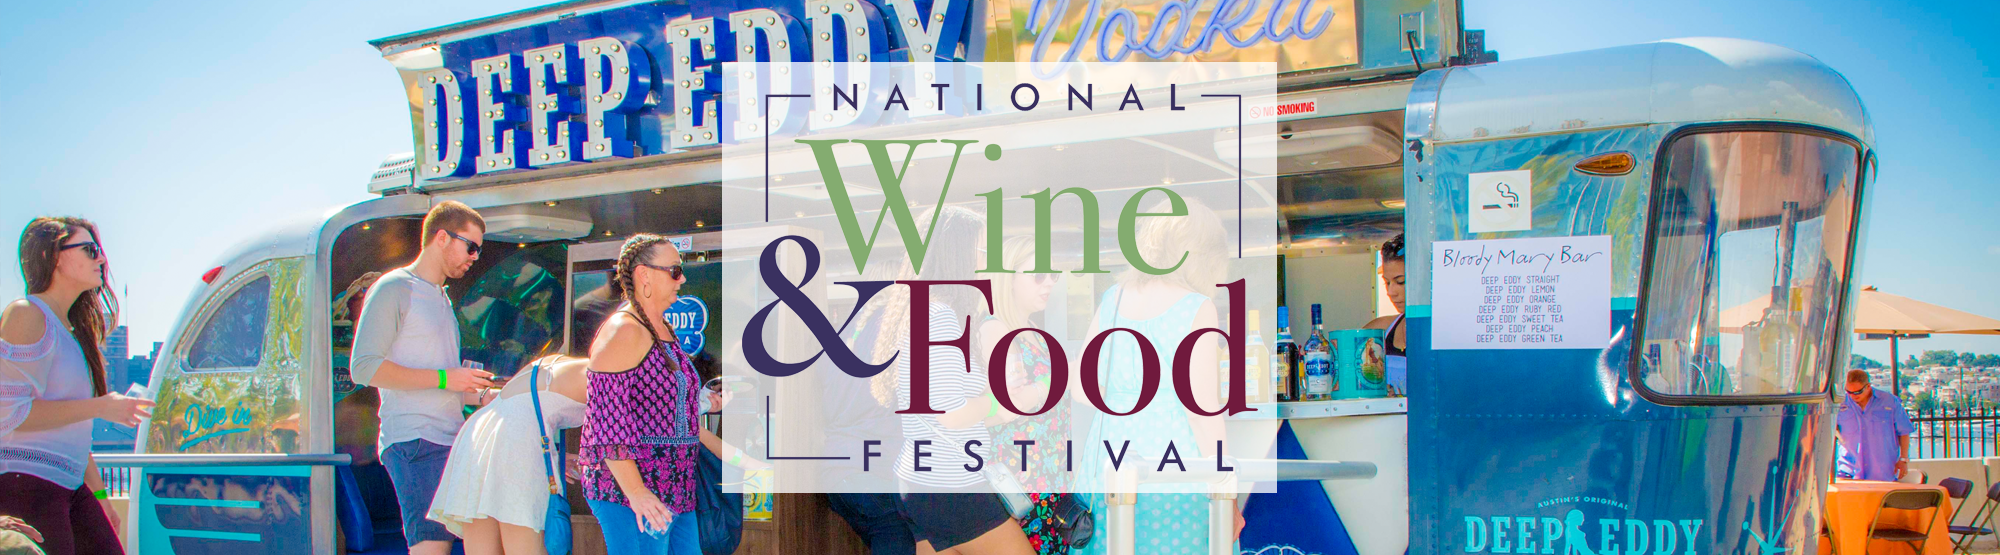 National Wine and Food Festival